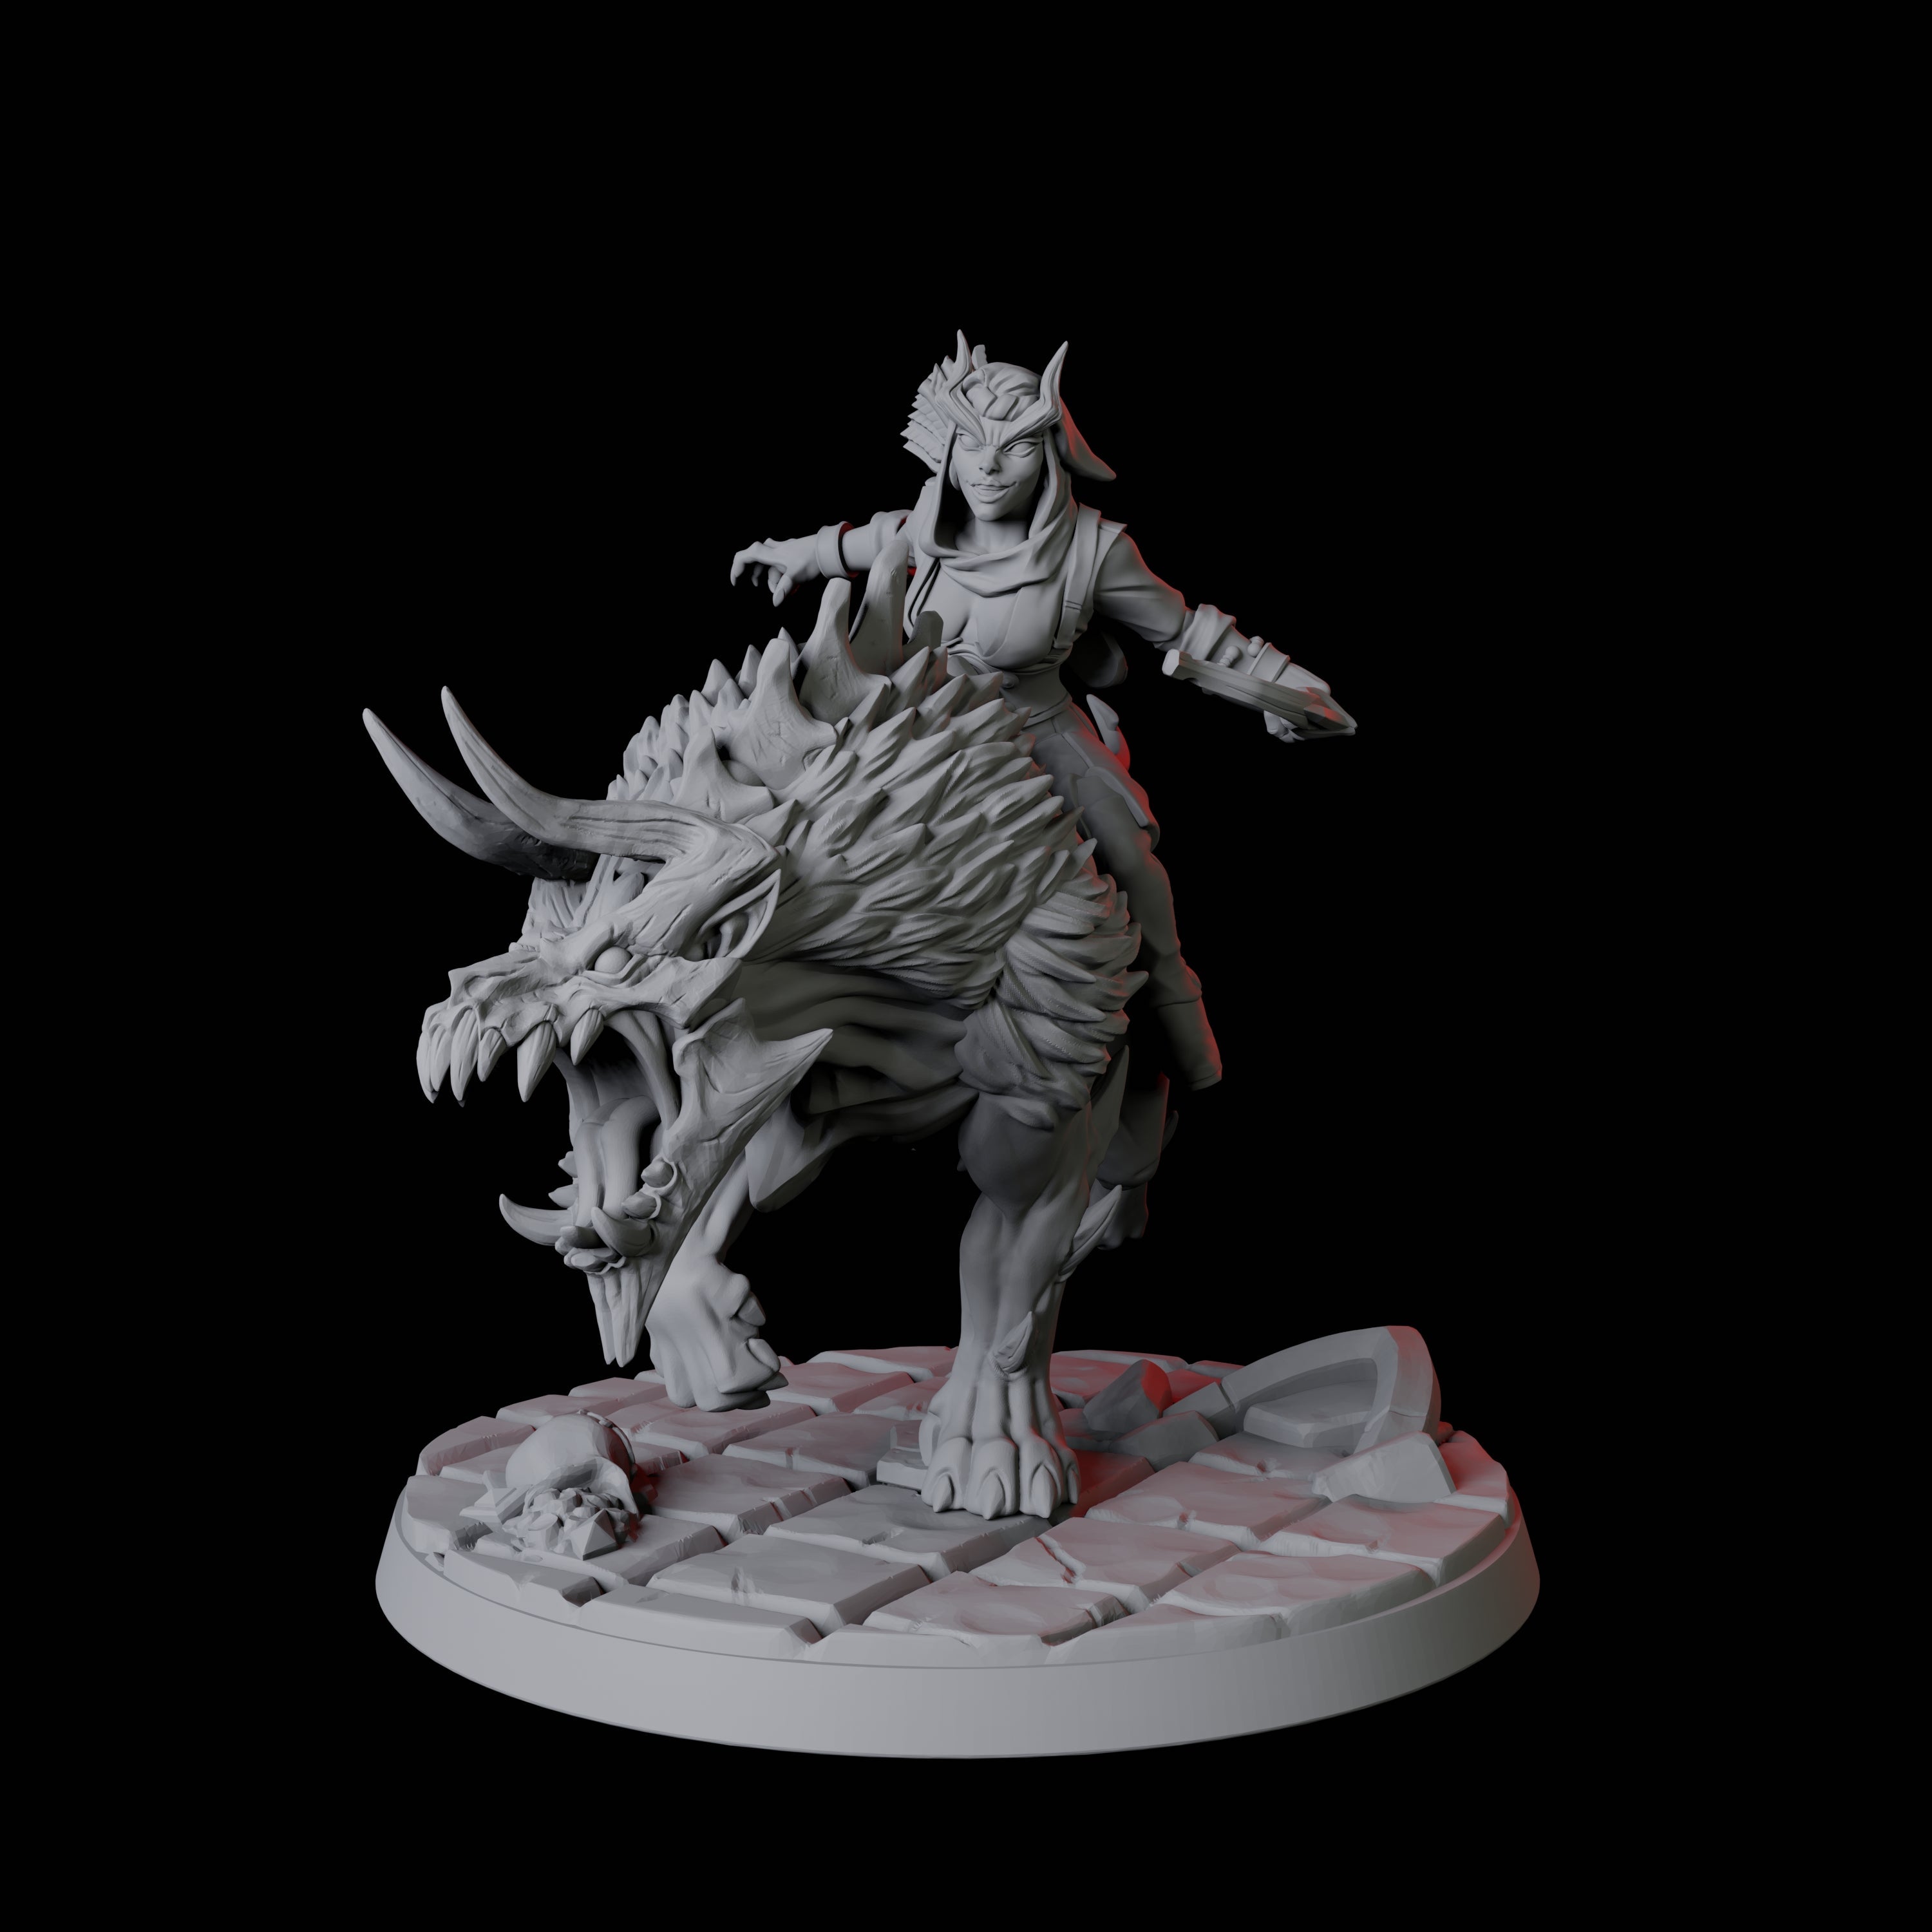 Four Tiefling Tricksters on Hell Hounds Miniature for Dungeons and Dragons, Pathfinder or other TTRPGs